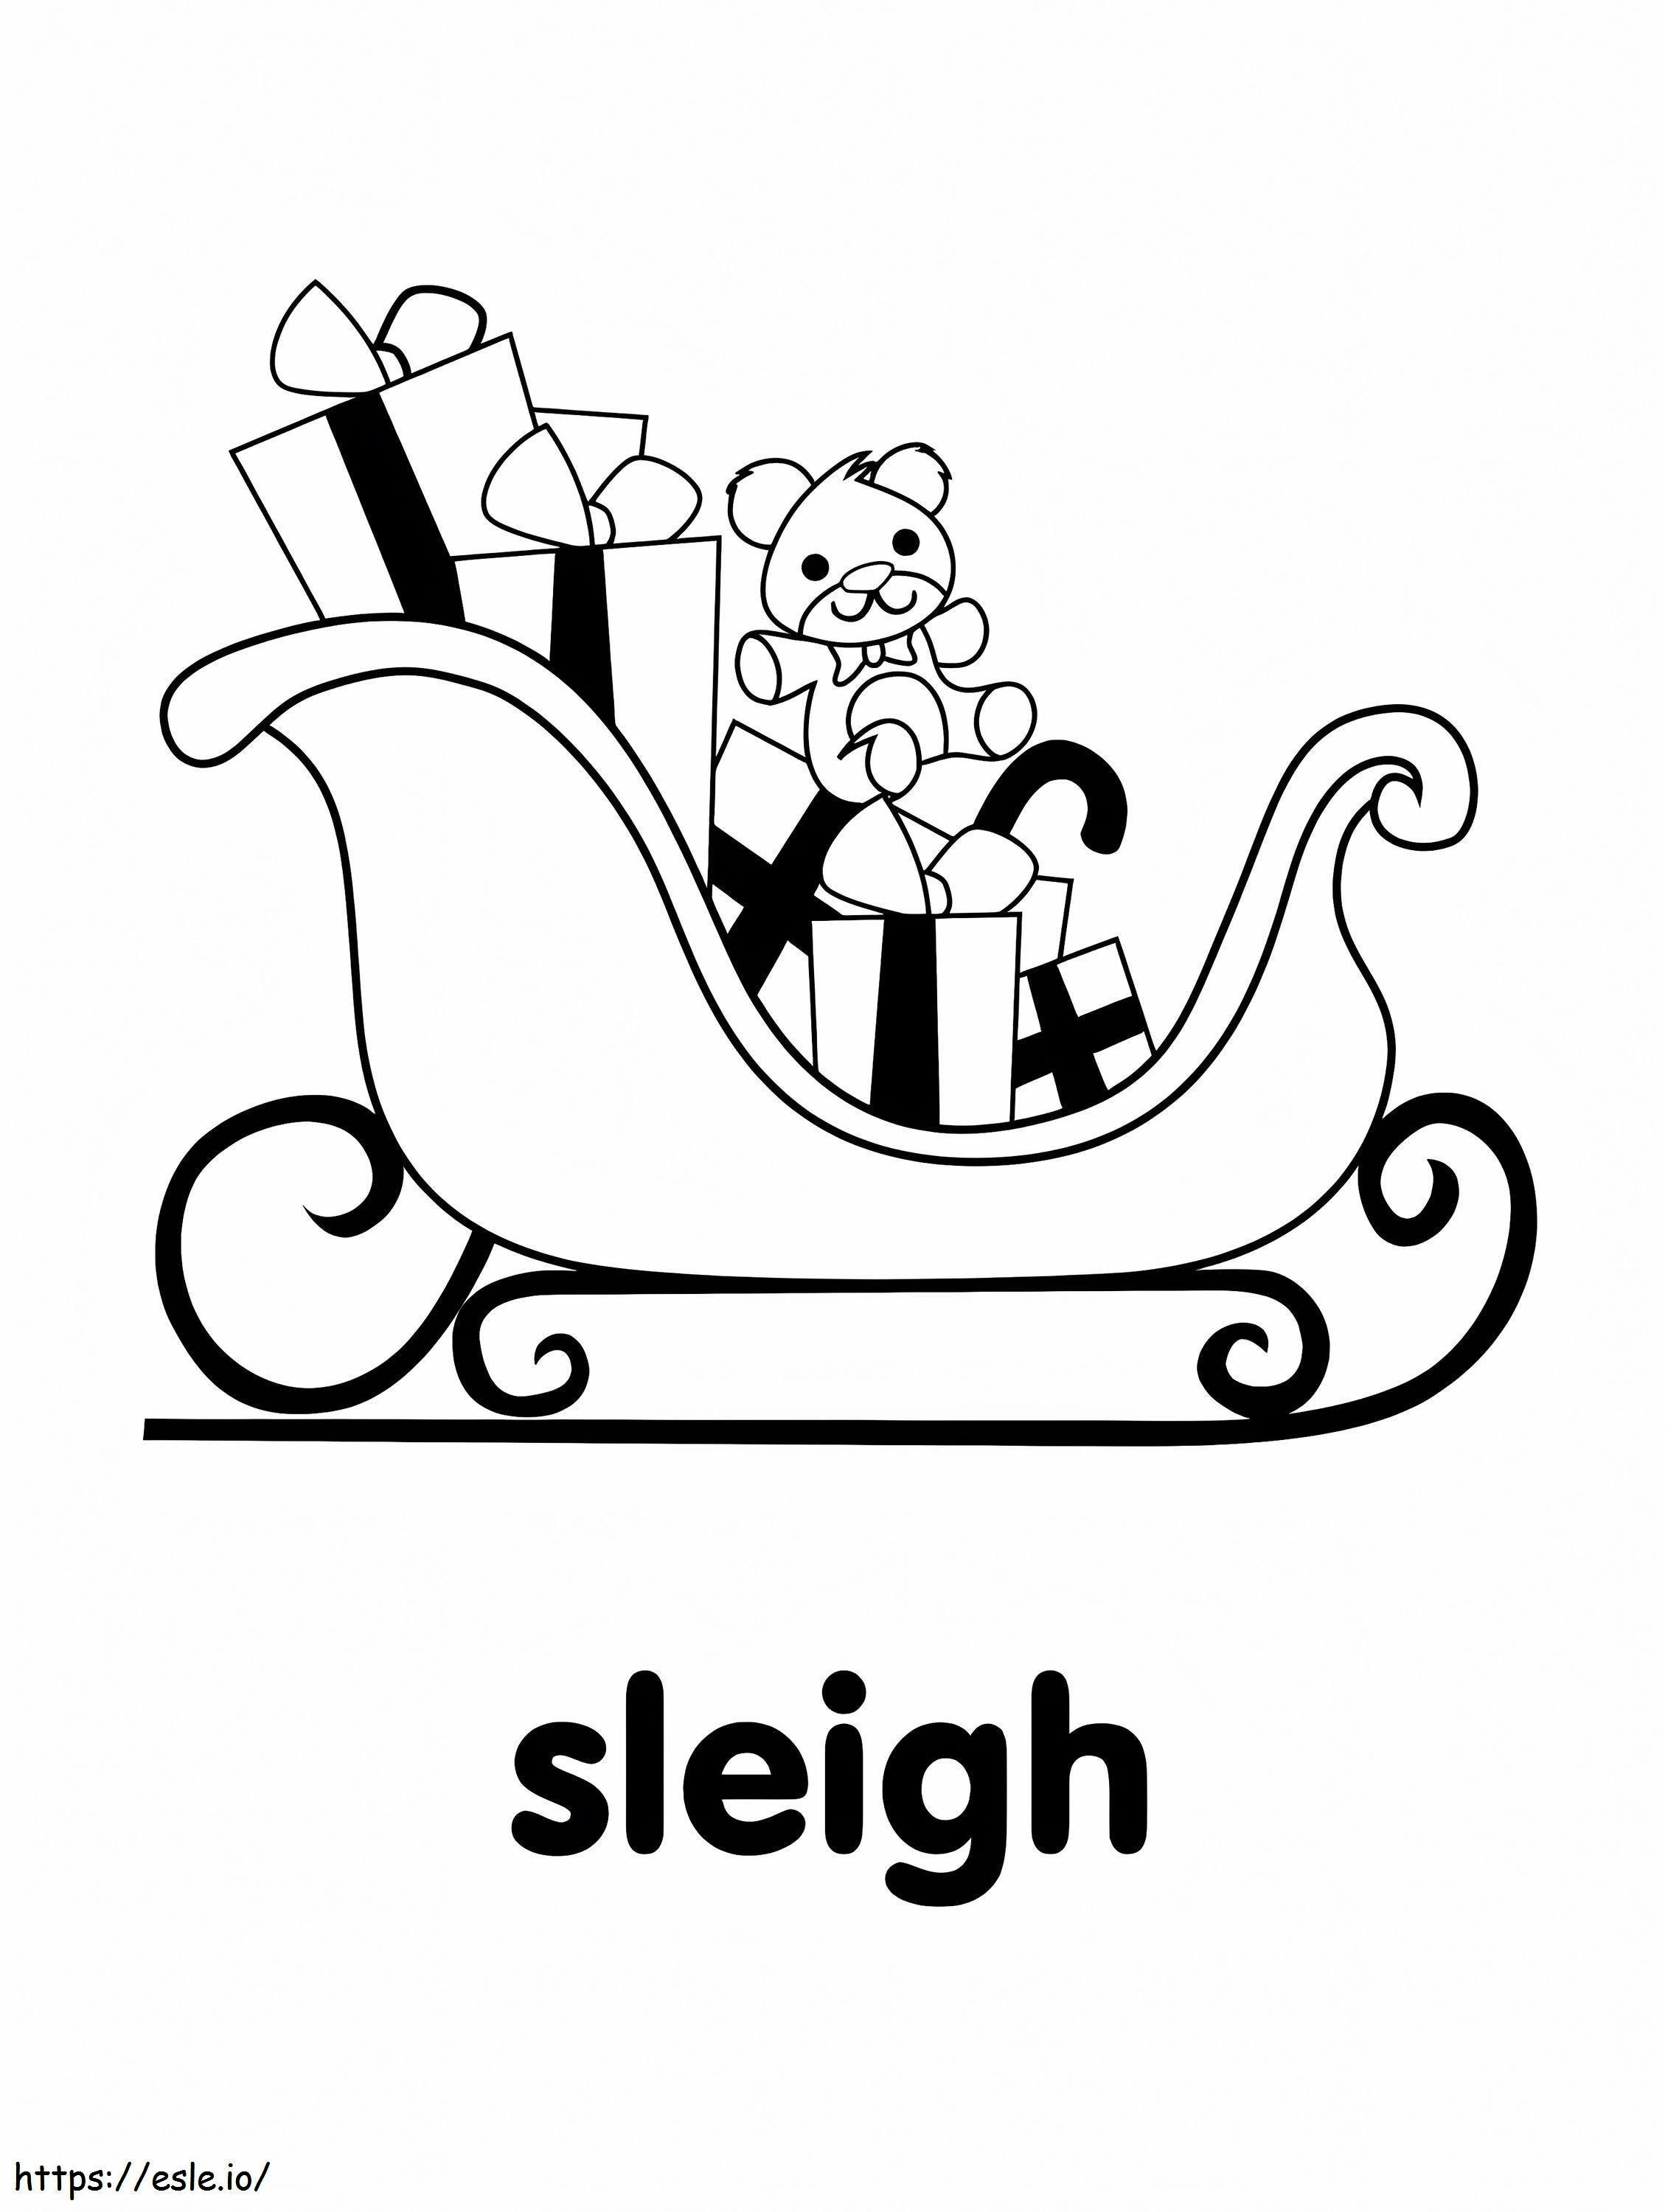 Sleigh coloring page